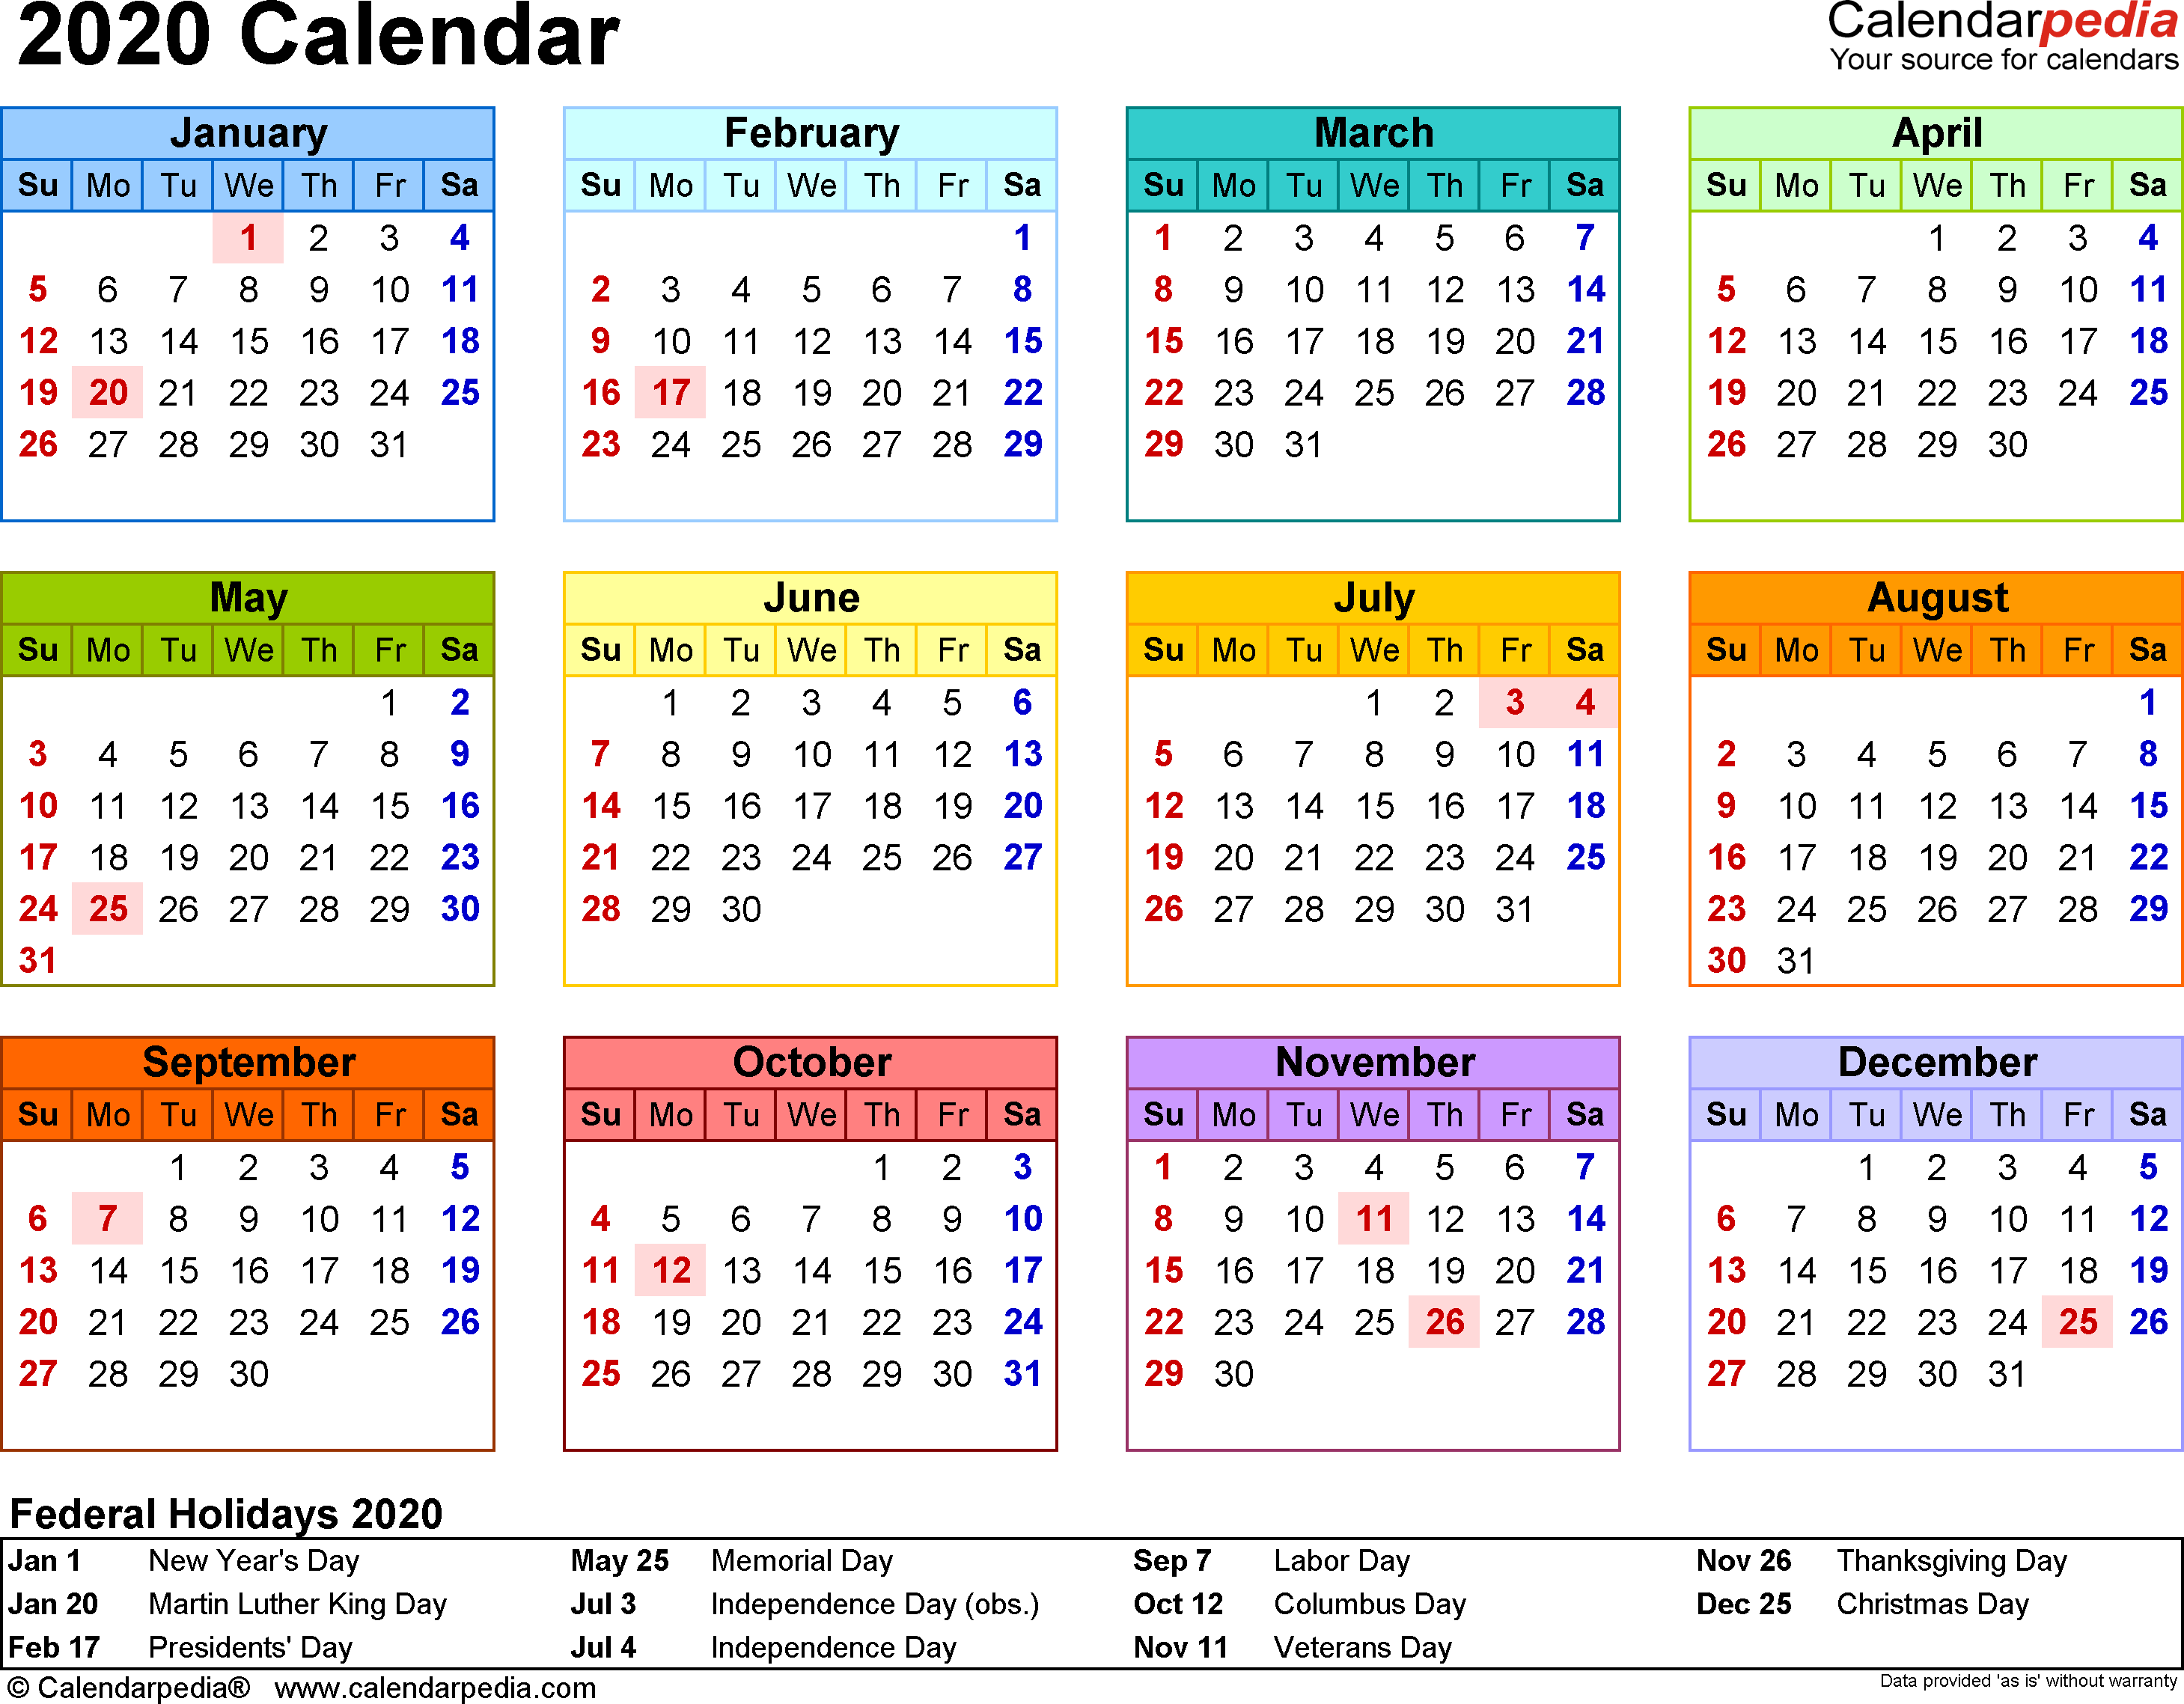 Download 2020 calendar printable free with holidays list